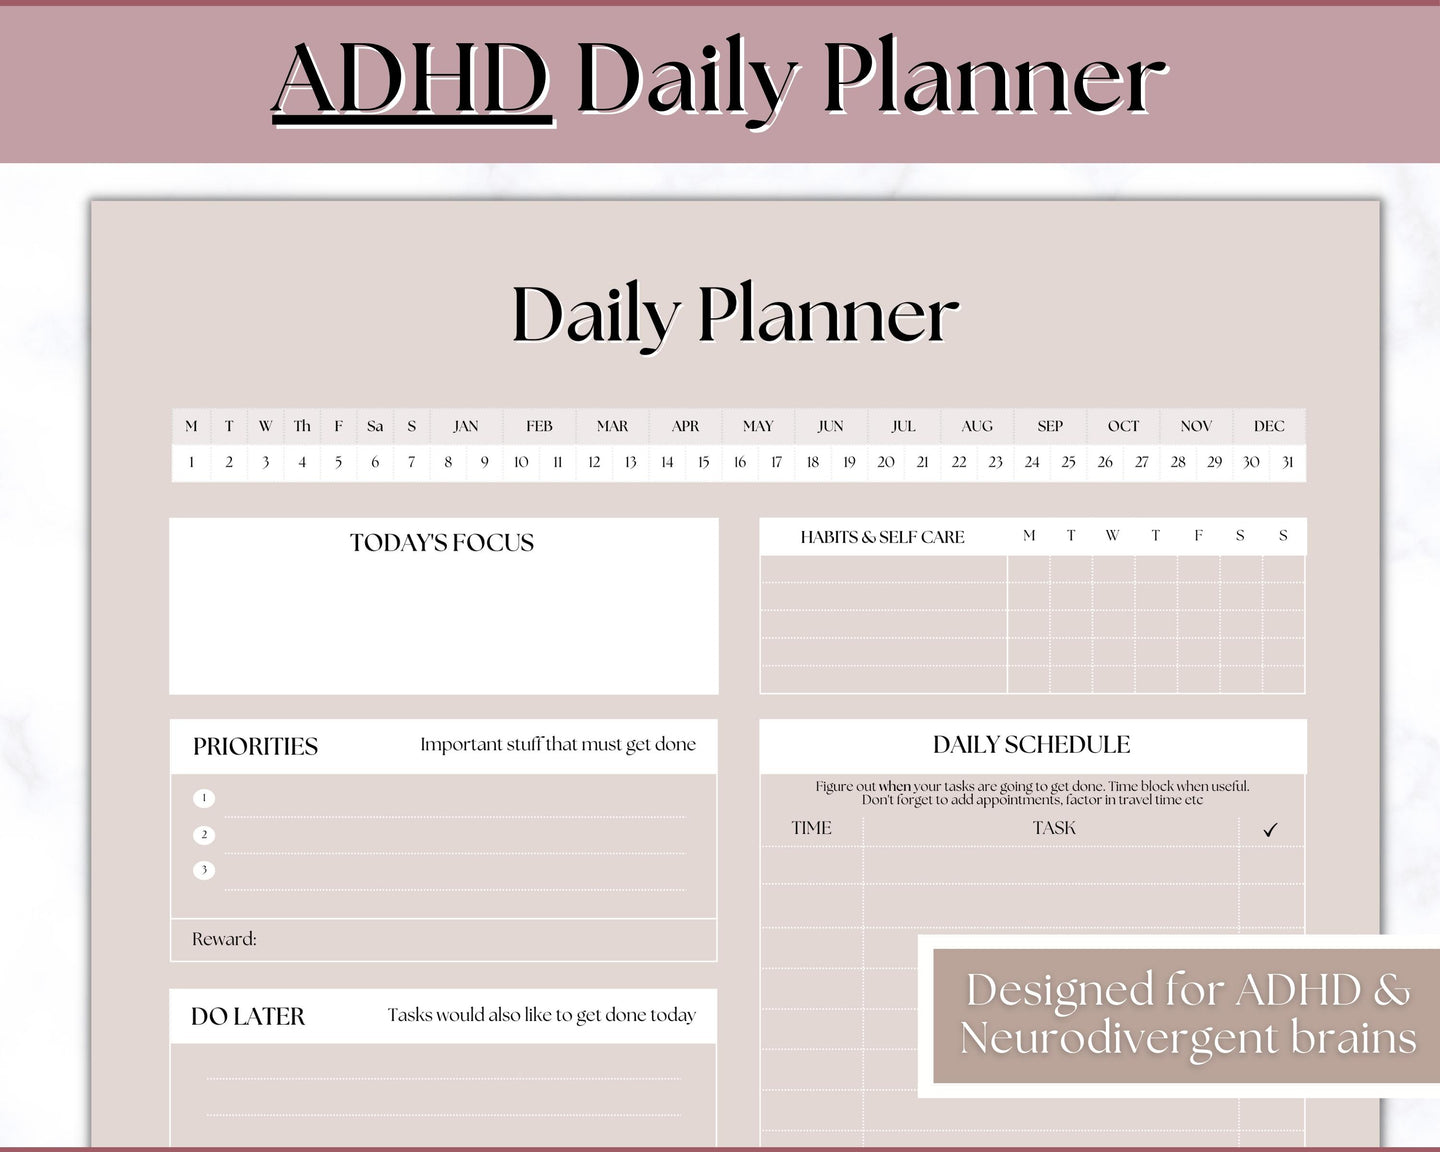 ADHD Daily Planner for Adults - Made for Neurodivergent Brains | Lux